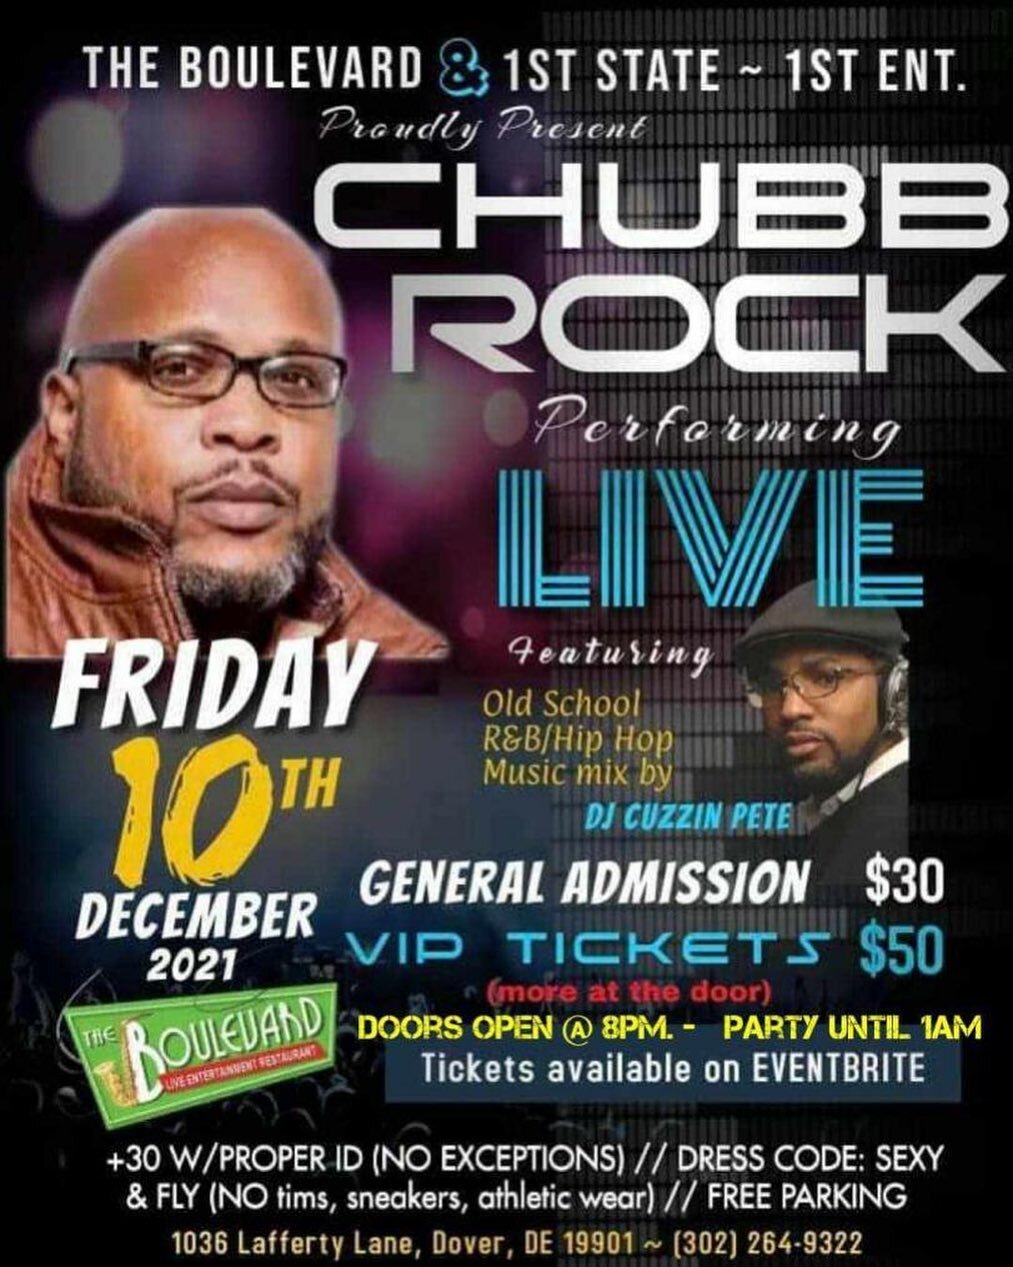 Delaware is next-as we bring that classic hip-hop to the city come hang out with your boy Chubbster we always have a good time in Joe Biden&lsquo;s hometown #classichiphop #goldenerahiphop #delaware #chubbrock #treatemright